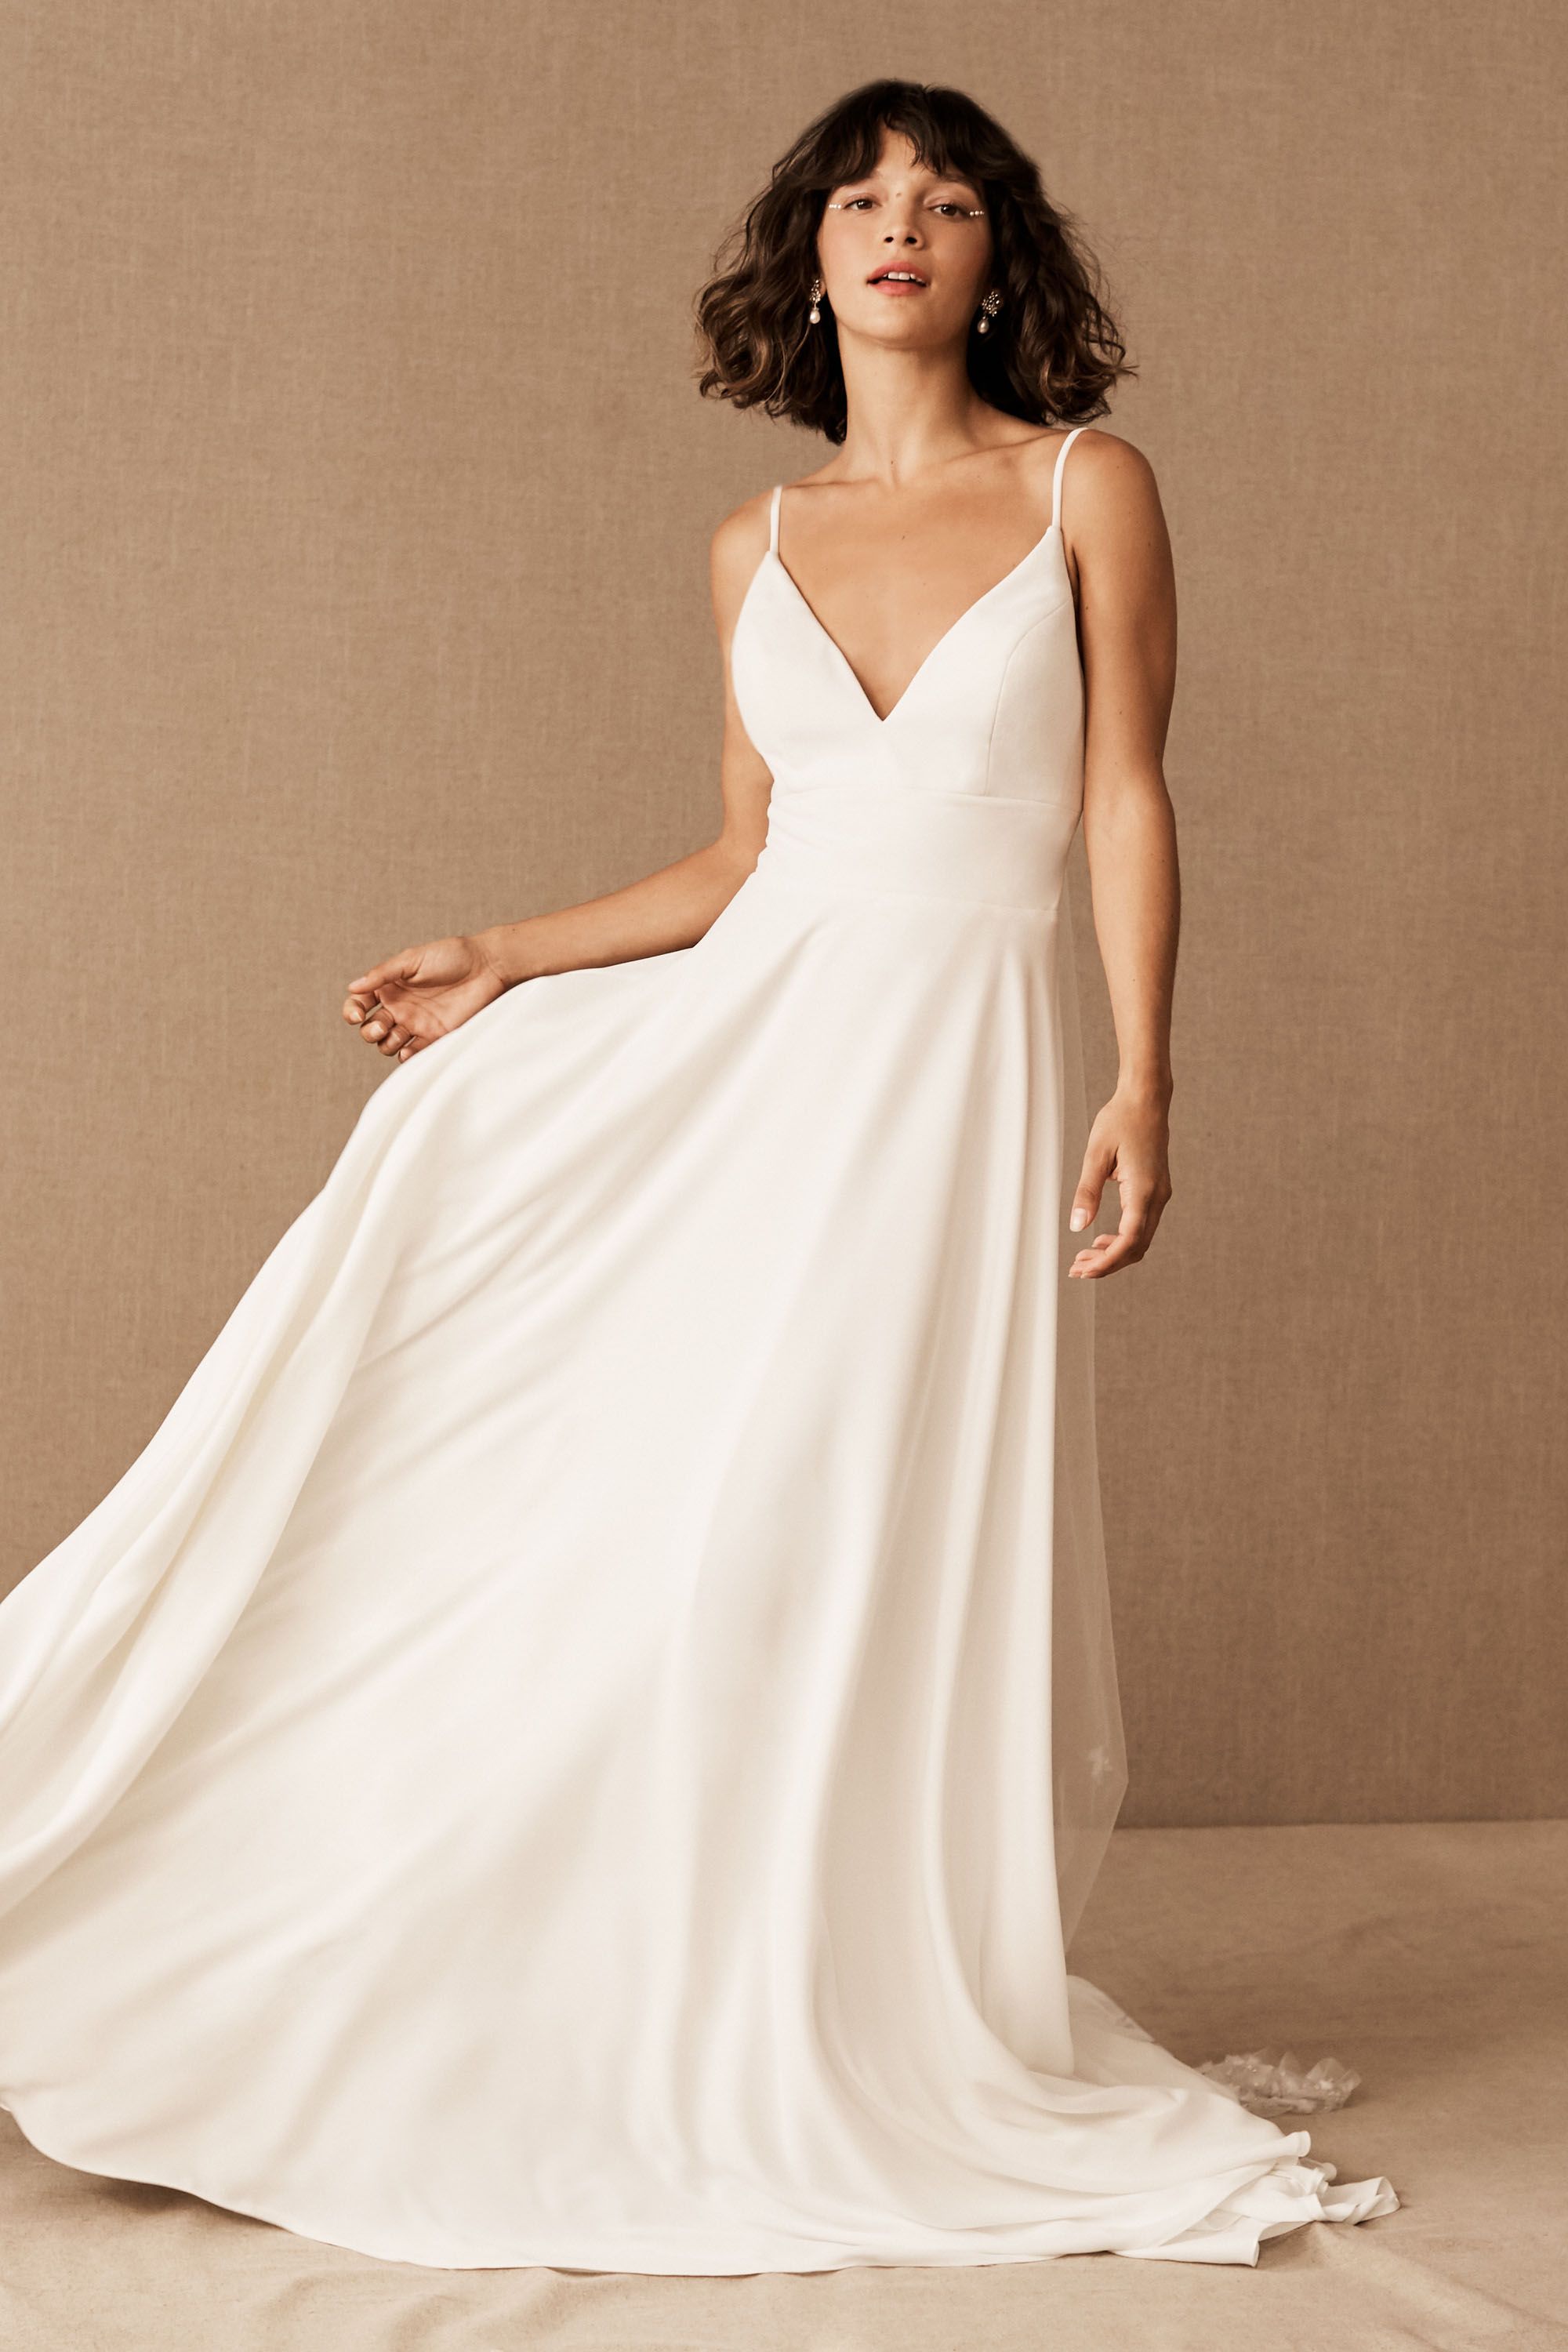 Wedding Neckline Guide to Match Any 